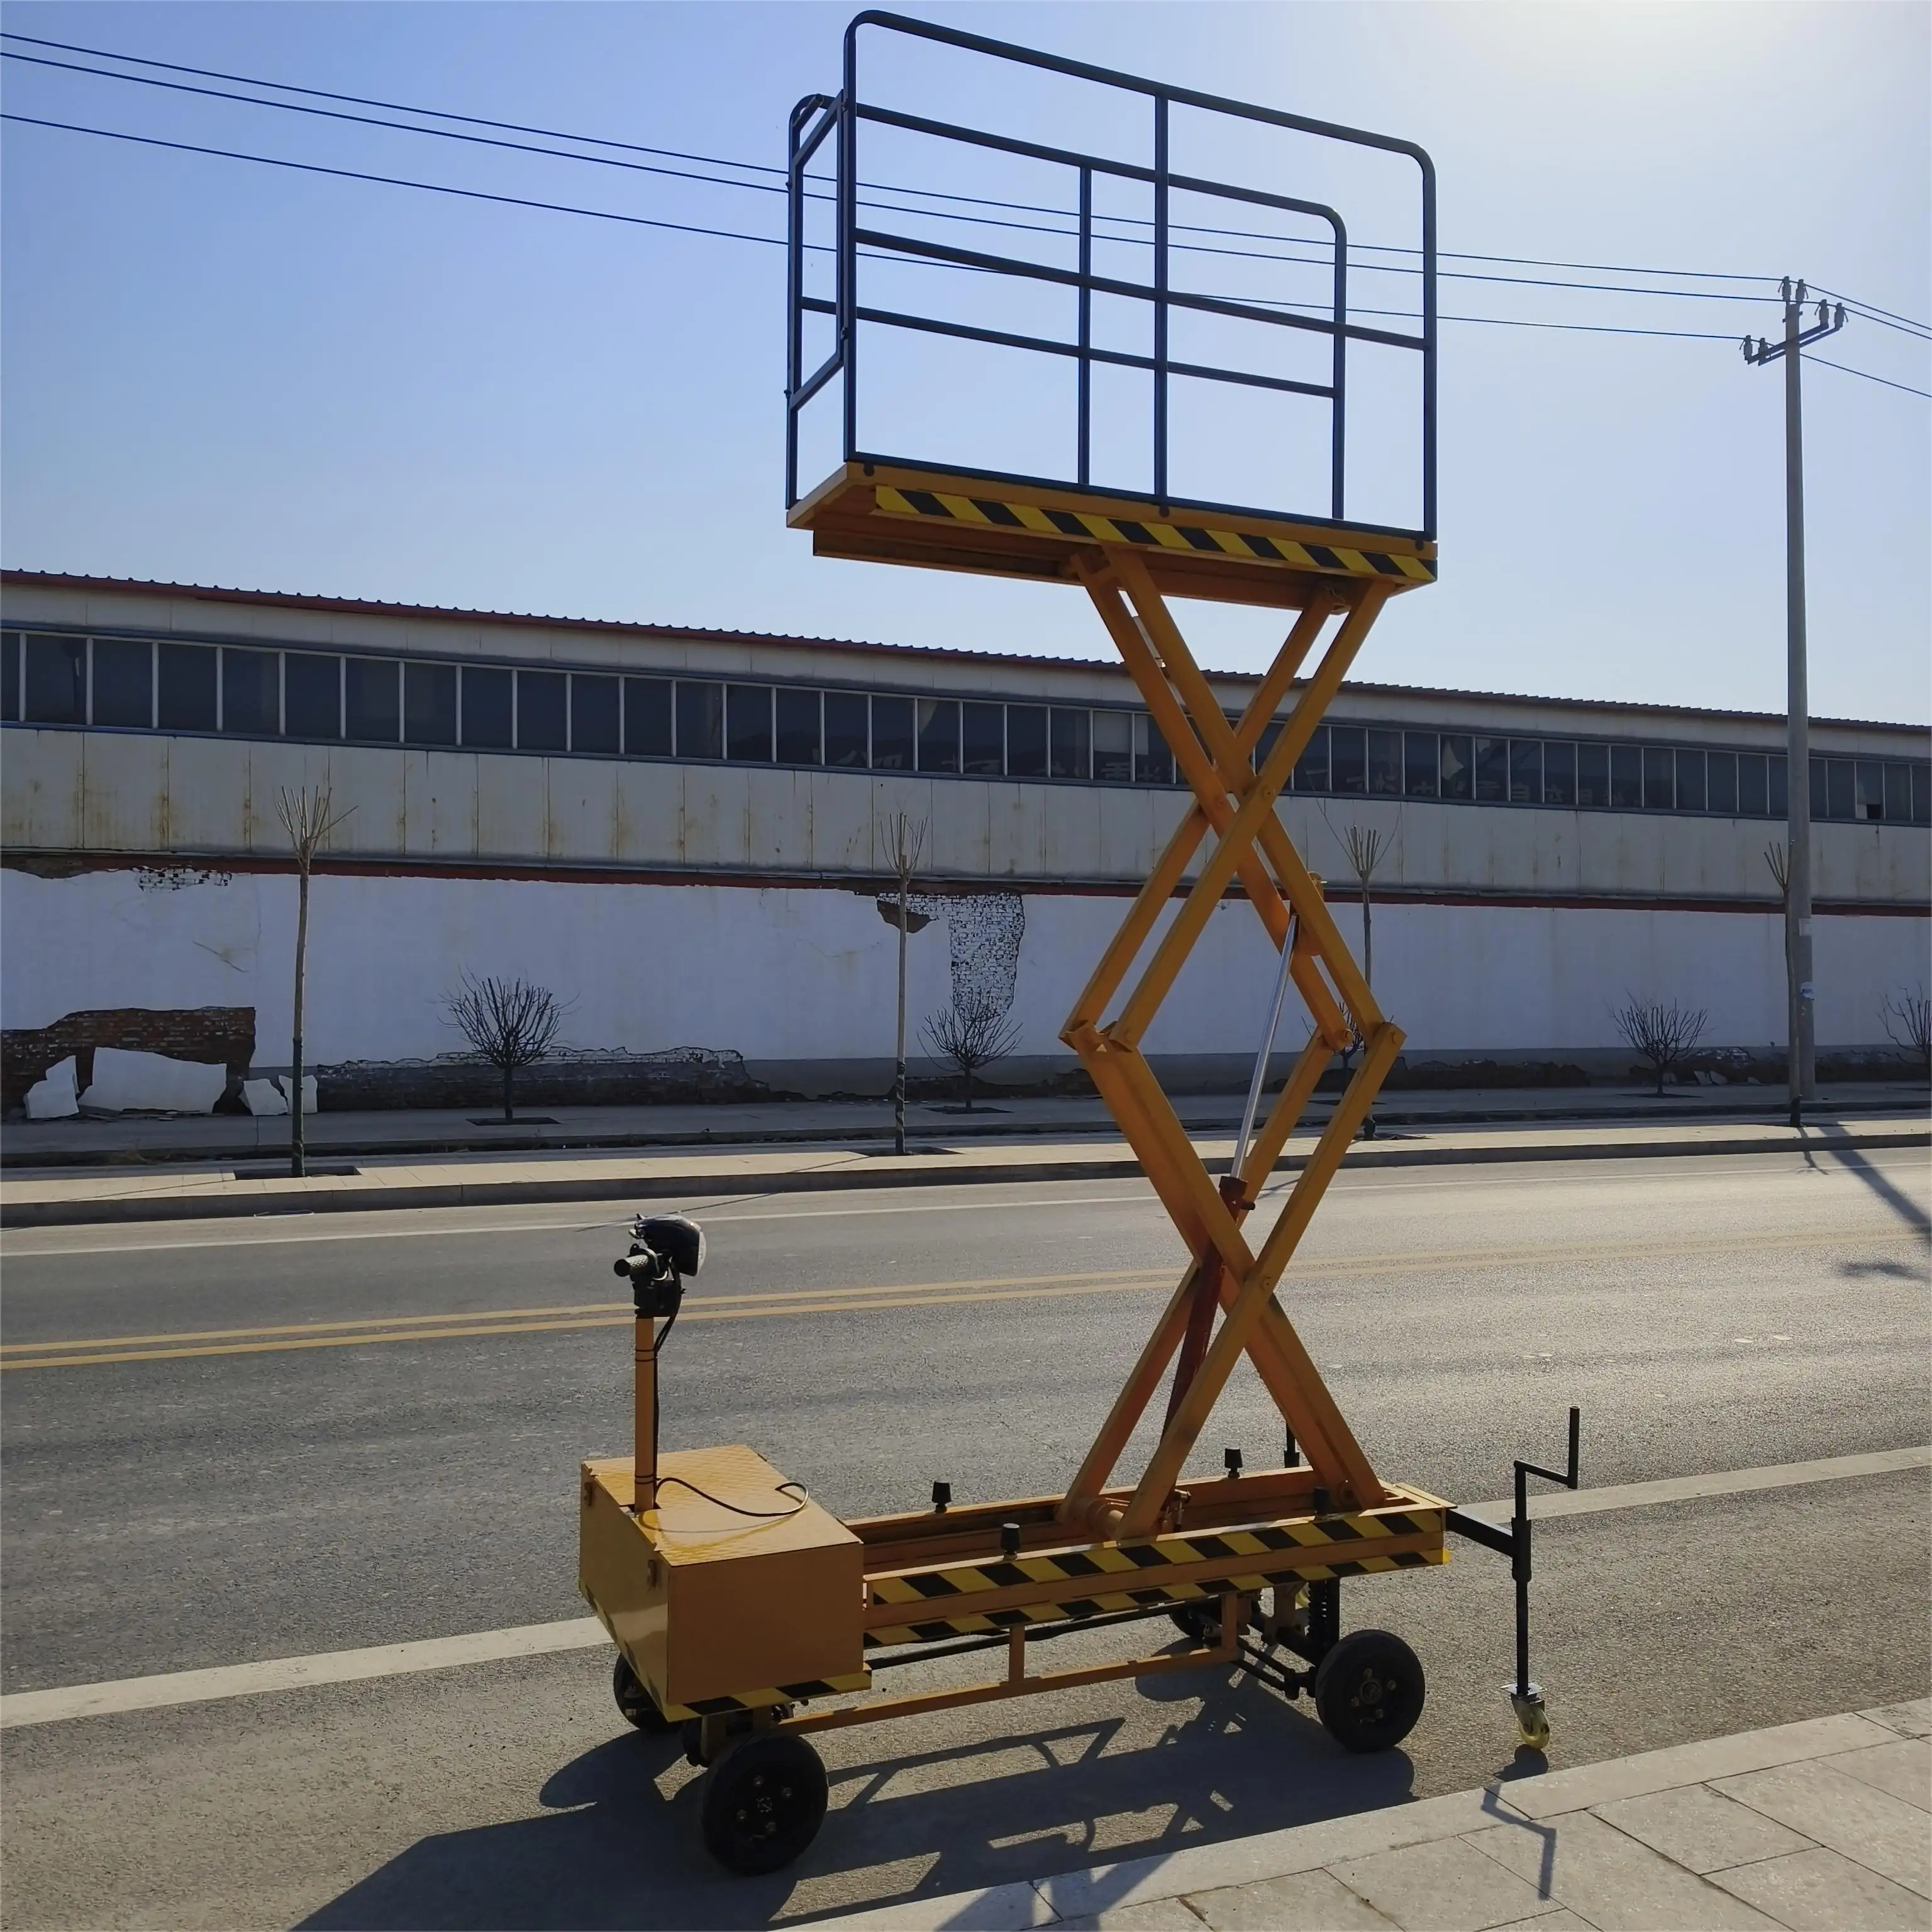 The Hydraulic Rail Trolley Can Be Raised Up To 3 Meters To Pick Vegetables And Fruits In The Greenhouse